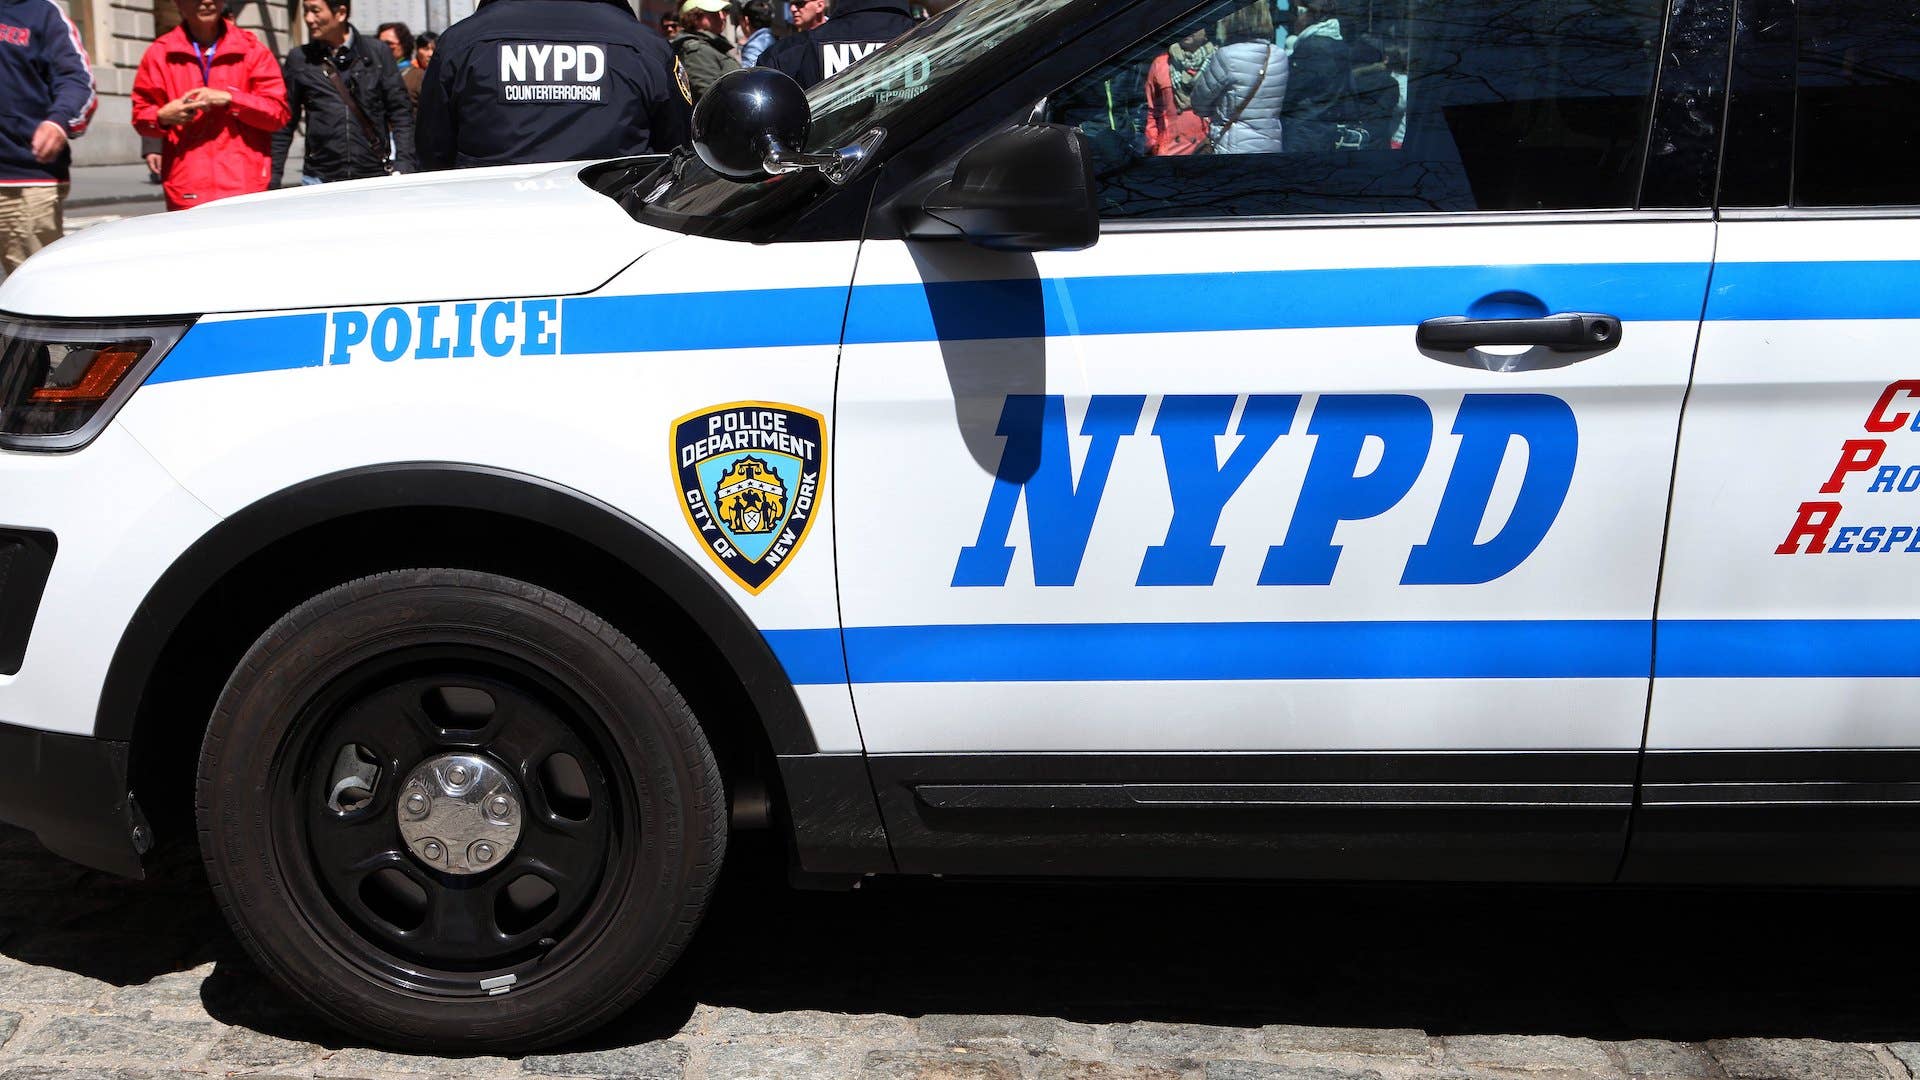 Photograph of an NYPD vehicle